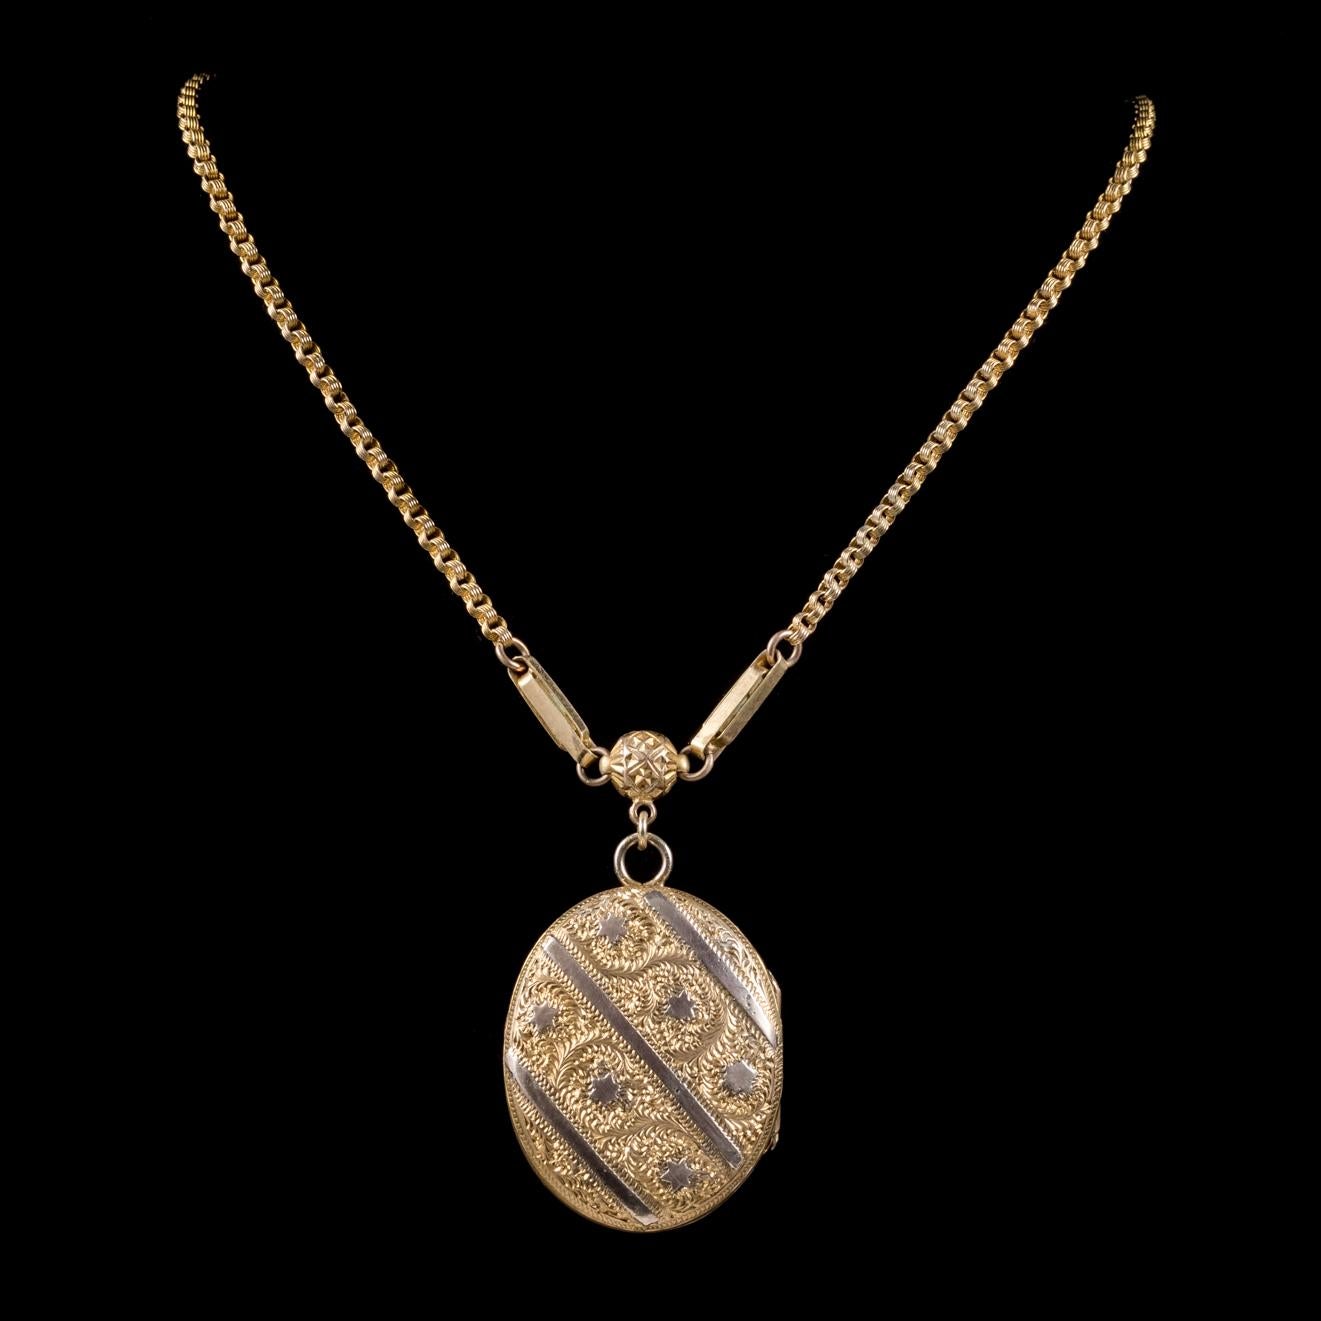 A beautiful antique Victorian necklace C. 1900, featuring a fabulous Locket engraved with Stars and detailed leaves across the front. 

The inside of the Locket is complete with a rim and window in which a photograph or lock of hair can be